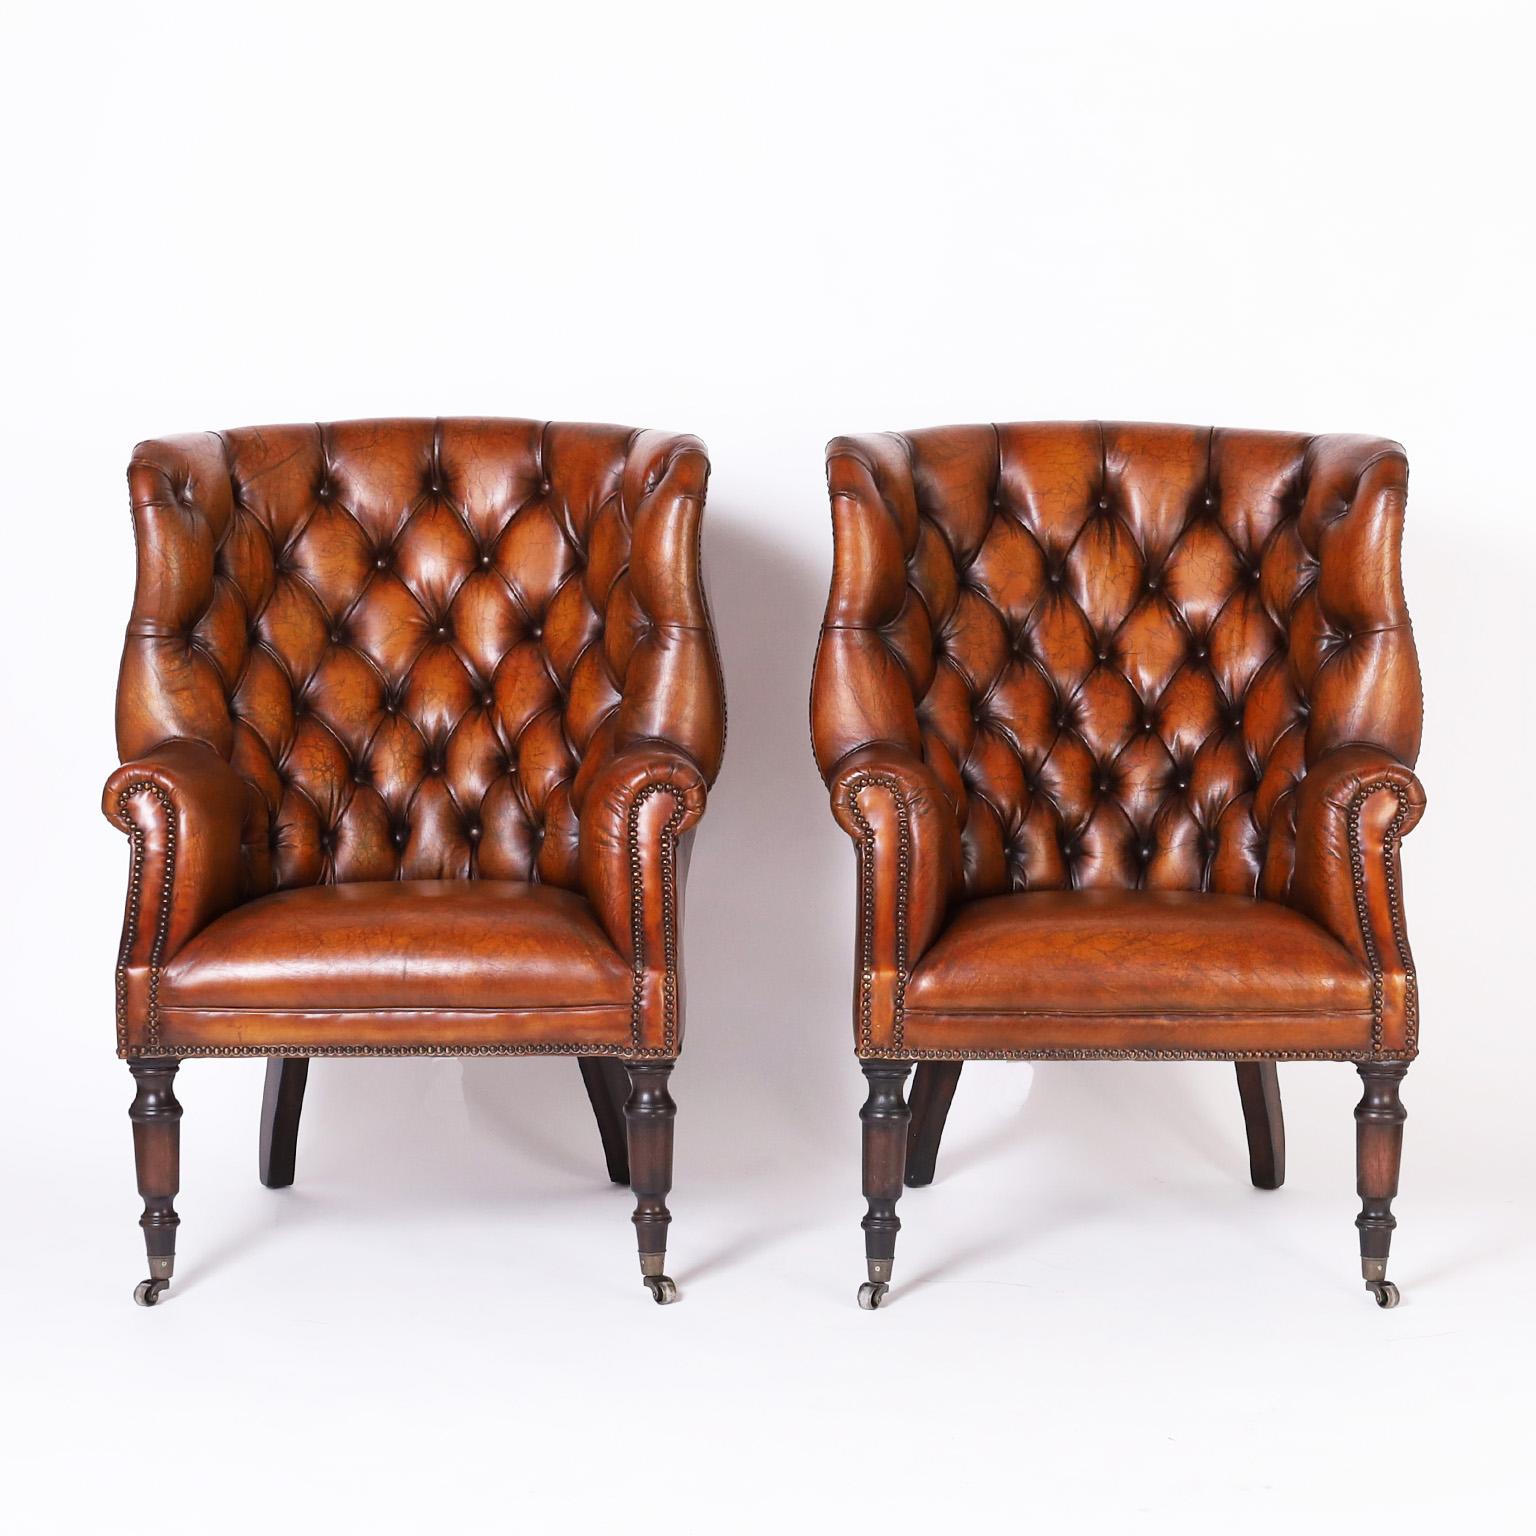 Handsome pair of British colonial style wingback armchairs upholstered in lush brown leather in a classic elegant form and featuring button tufted backs, brass studs, and turned legs on metal casters.